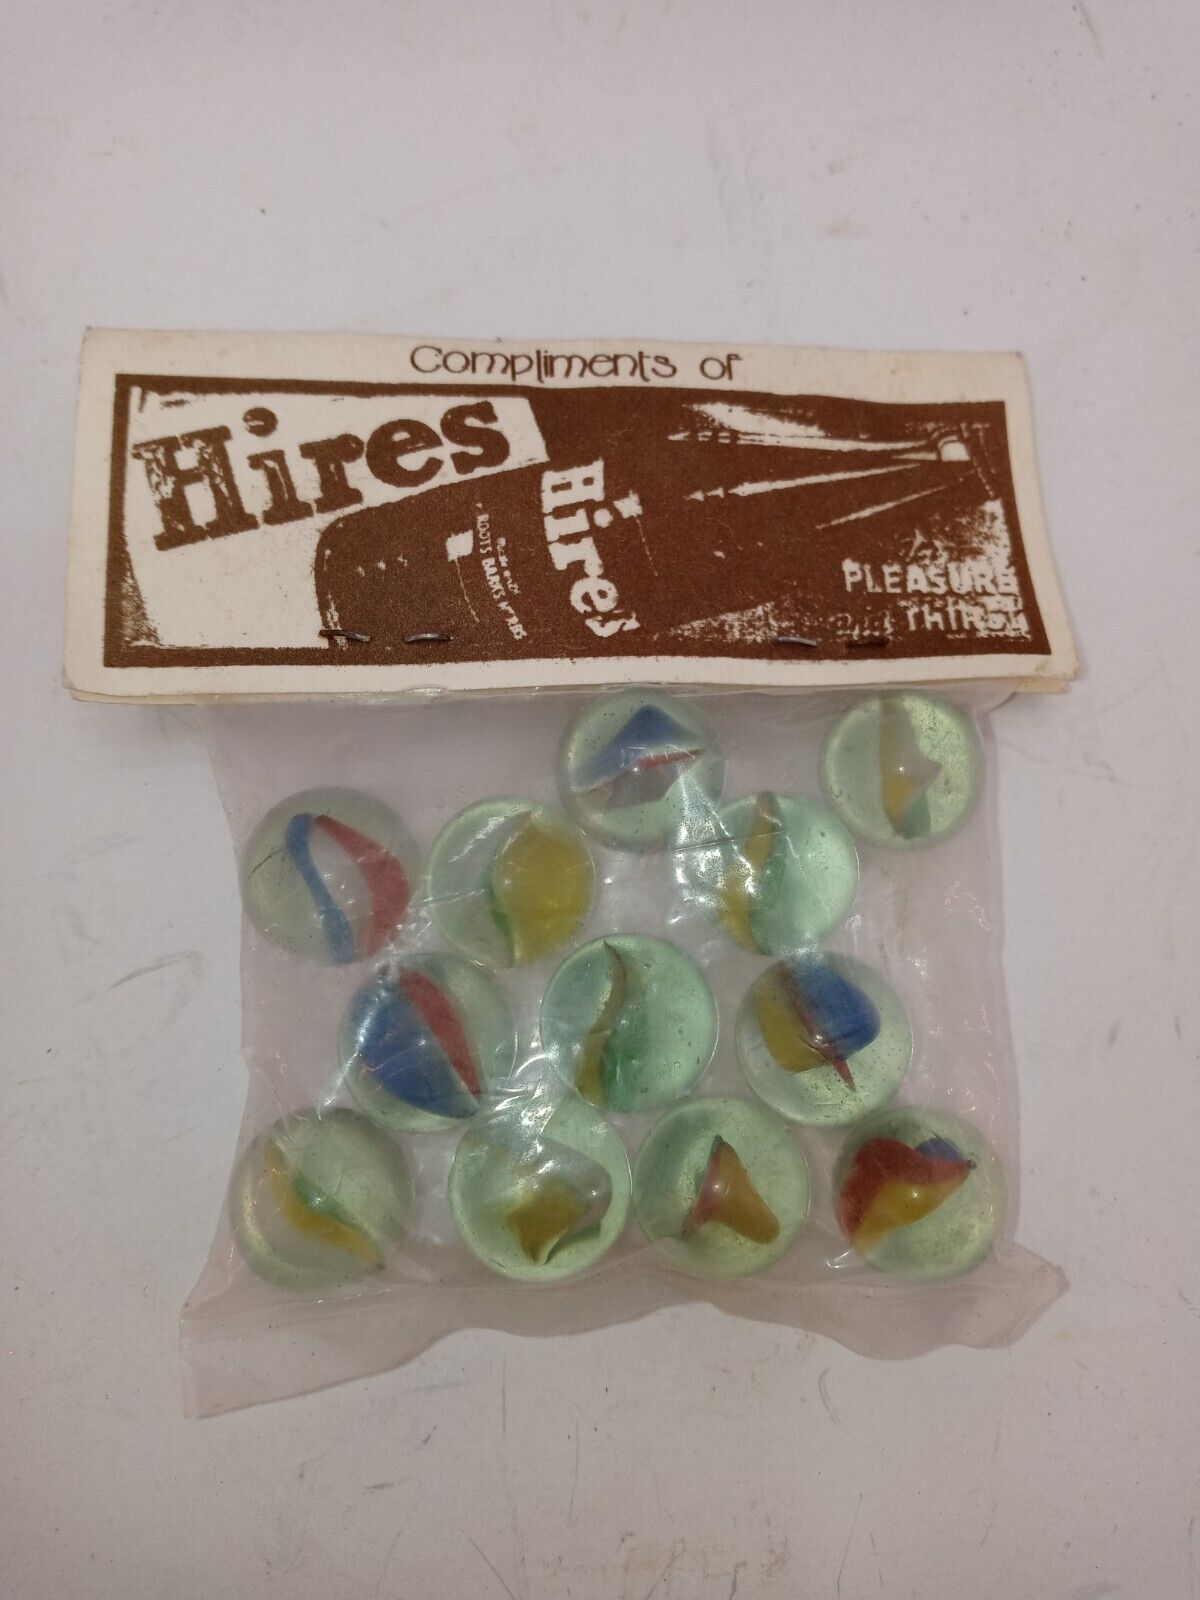 Vintage Marbles Compliments Of Hires Root beer - For Pleasure & Thirst -unopened